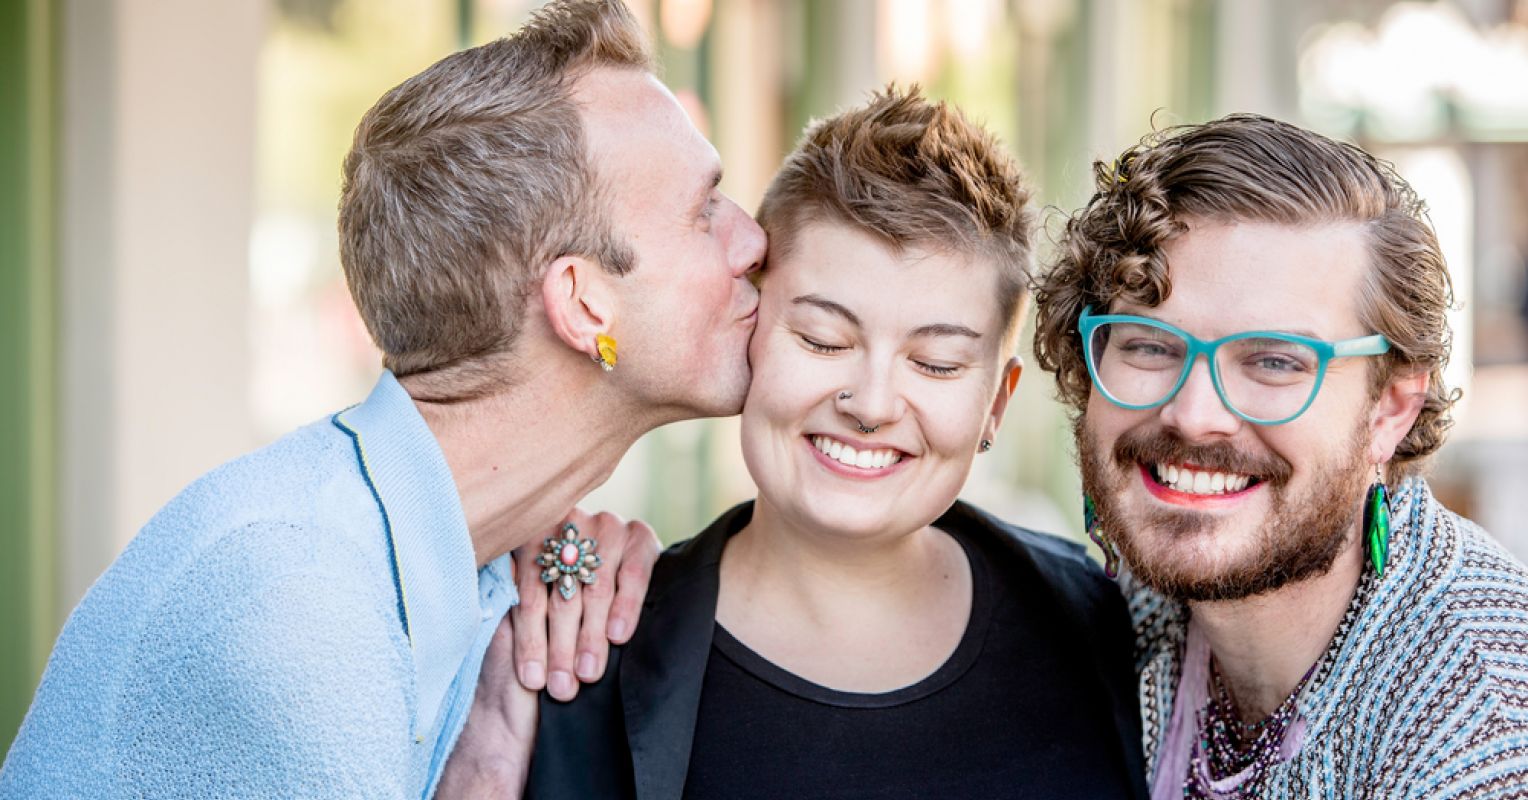 A Guide to Genderqueer, Non-Binary, and Genderfluid Identity